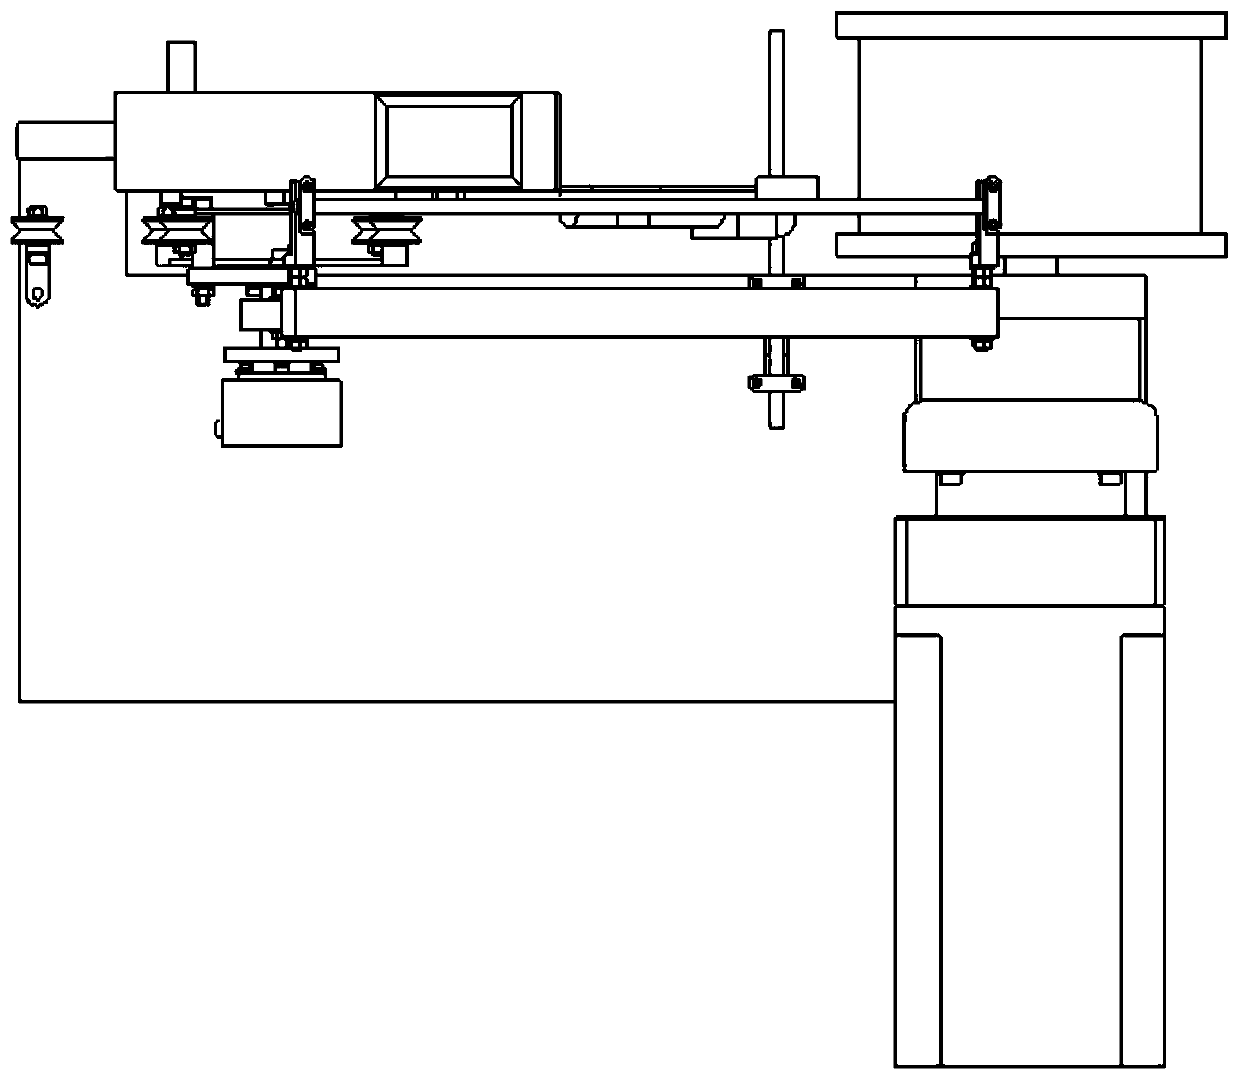 Active pay-off system with variable thread speed and constant tension